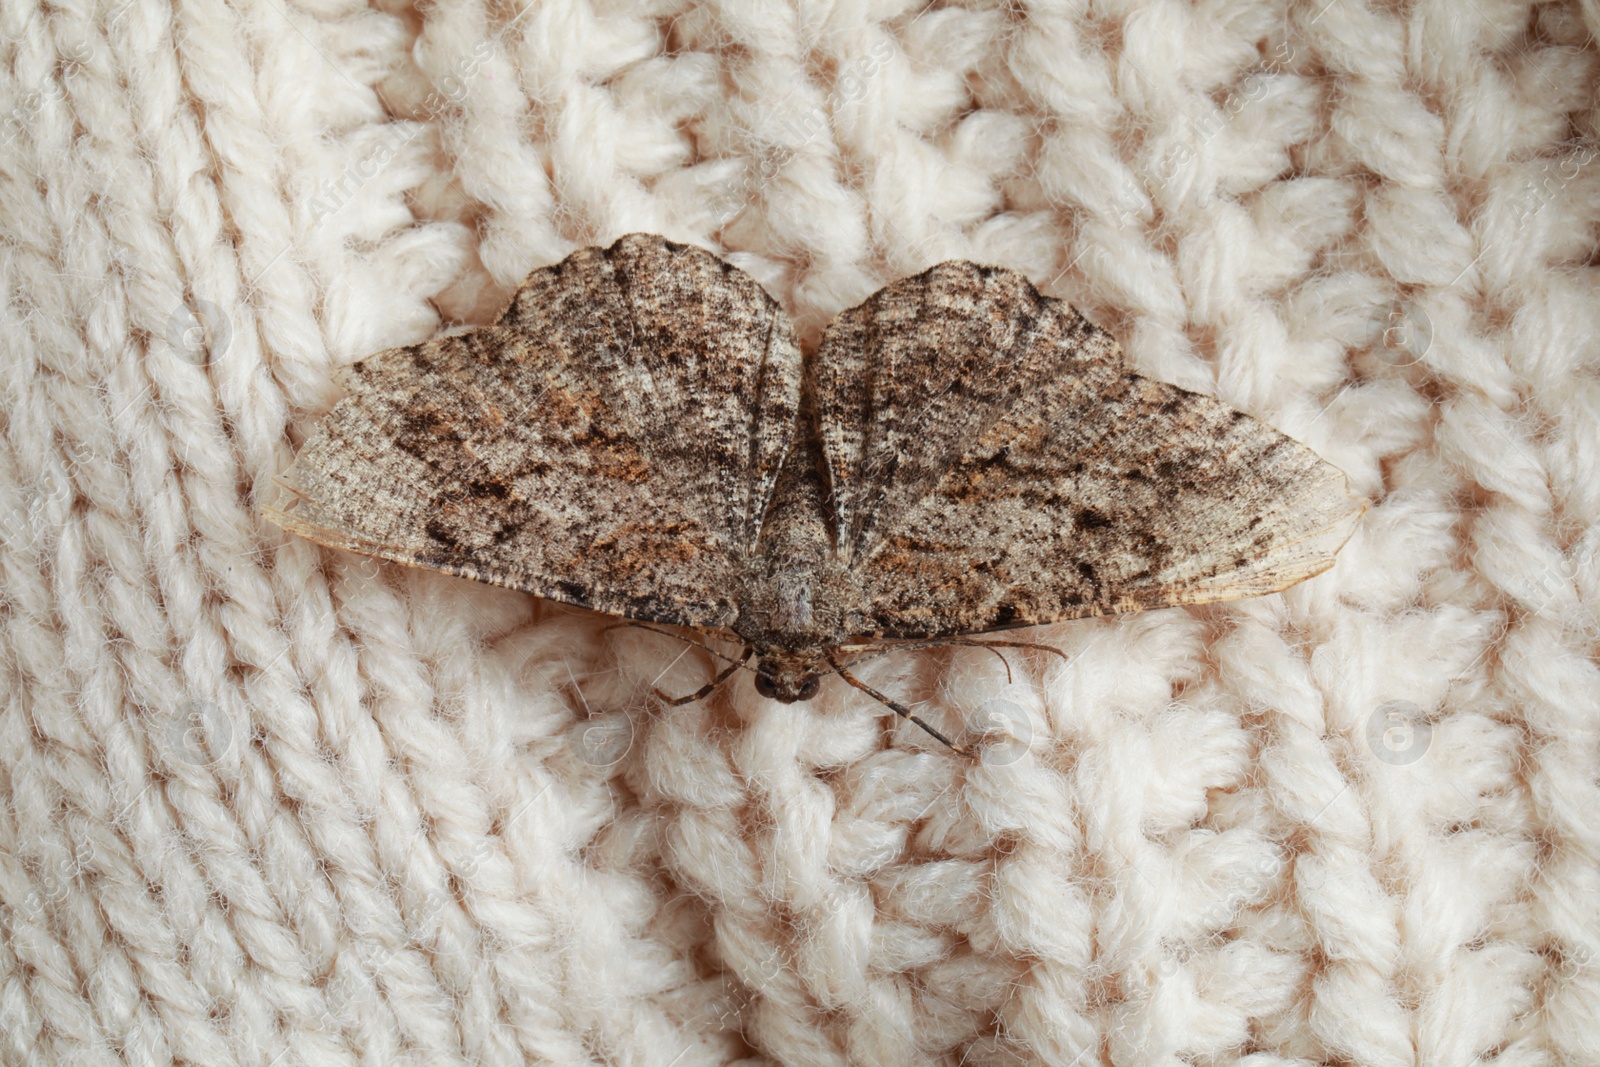 Photo of Alcis repandata moth on beige knitted sweater, top view